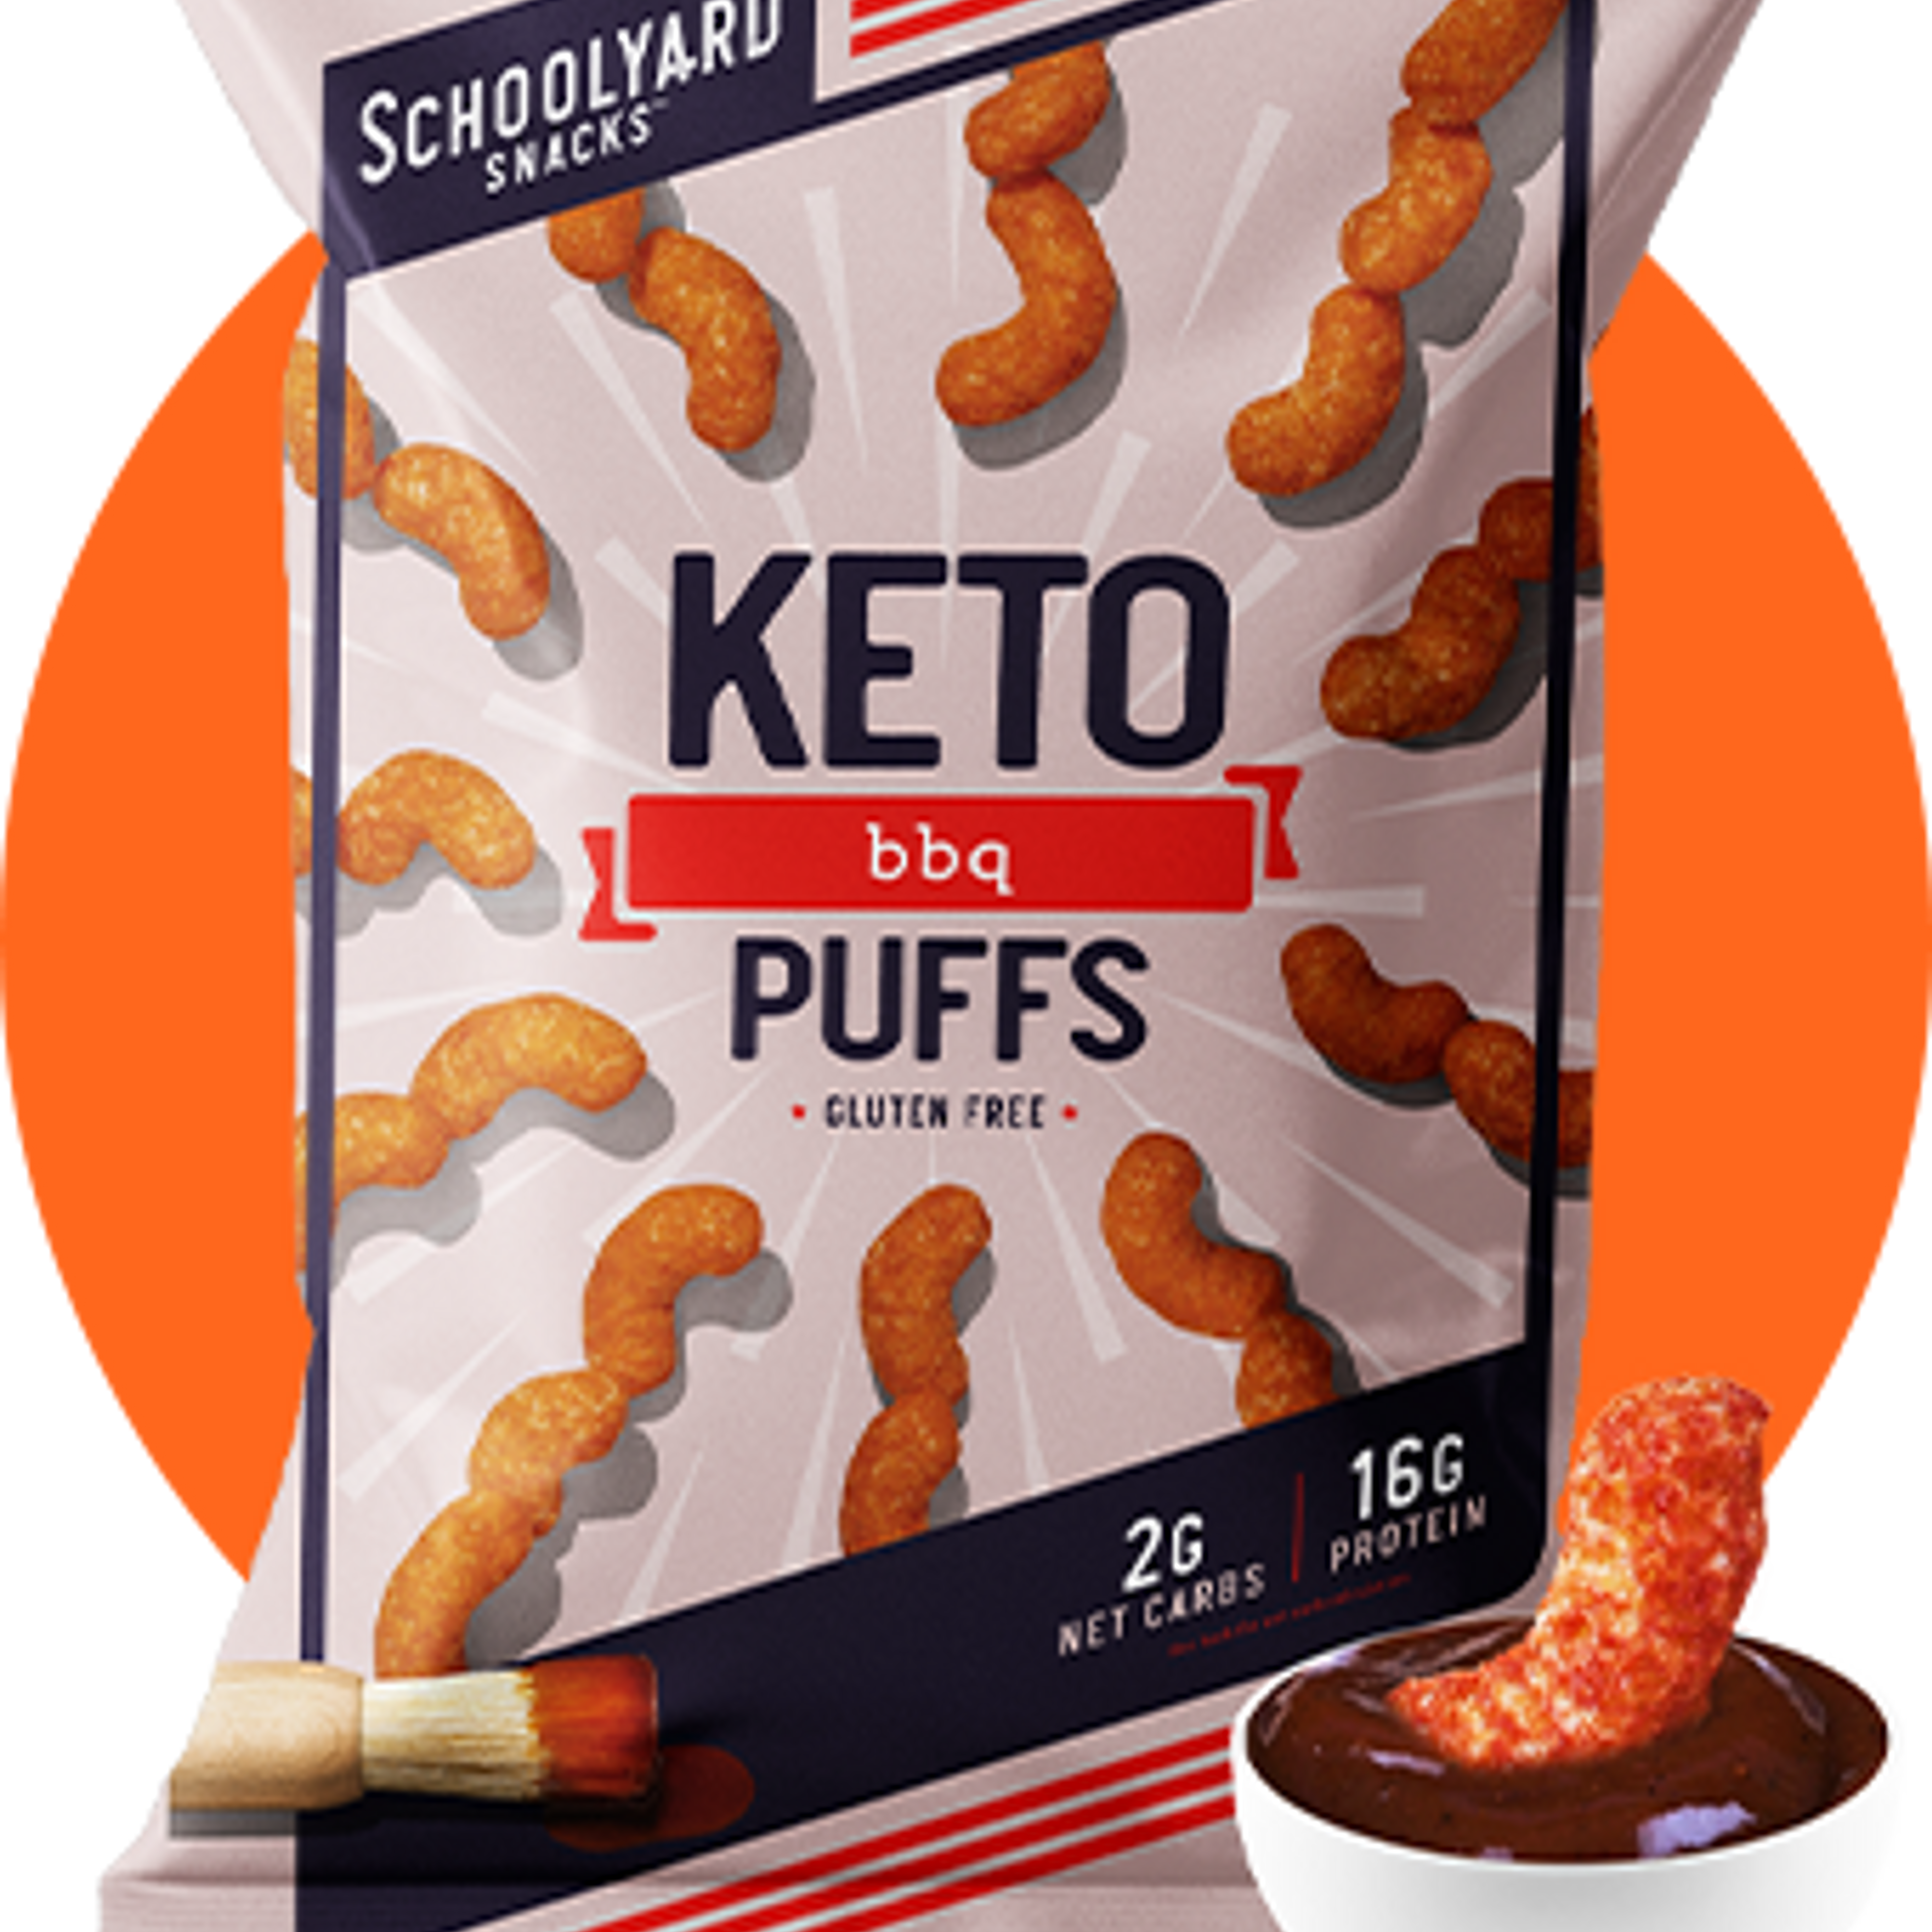 www.schoolyardsnacks.com/products/keto-cheese-puffs-6-family-size-bags